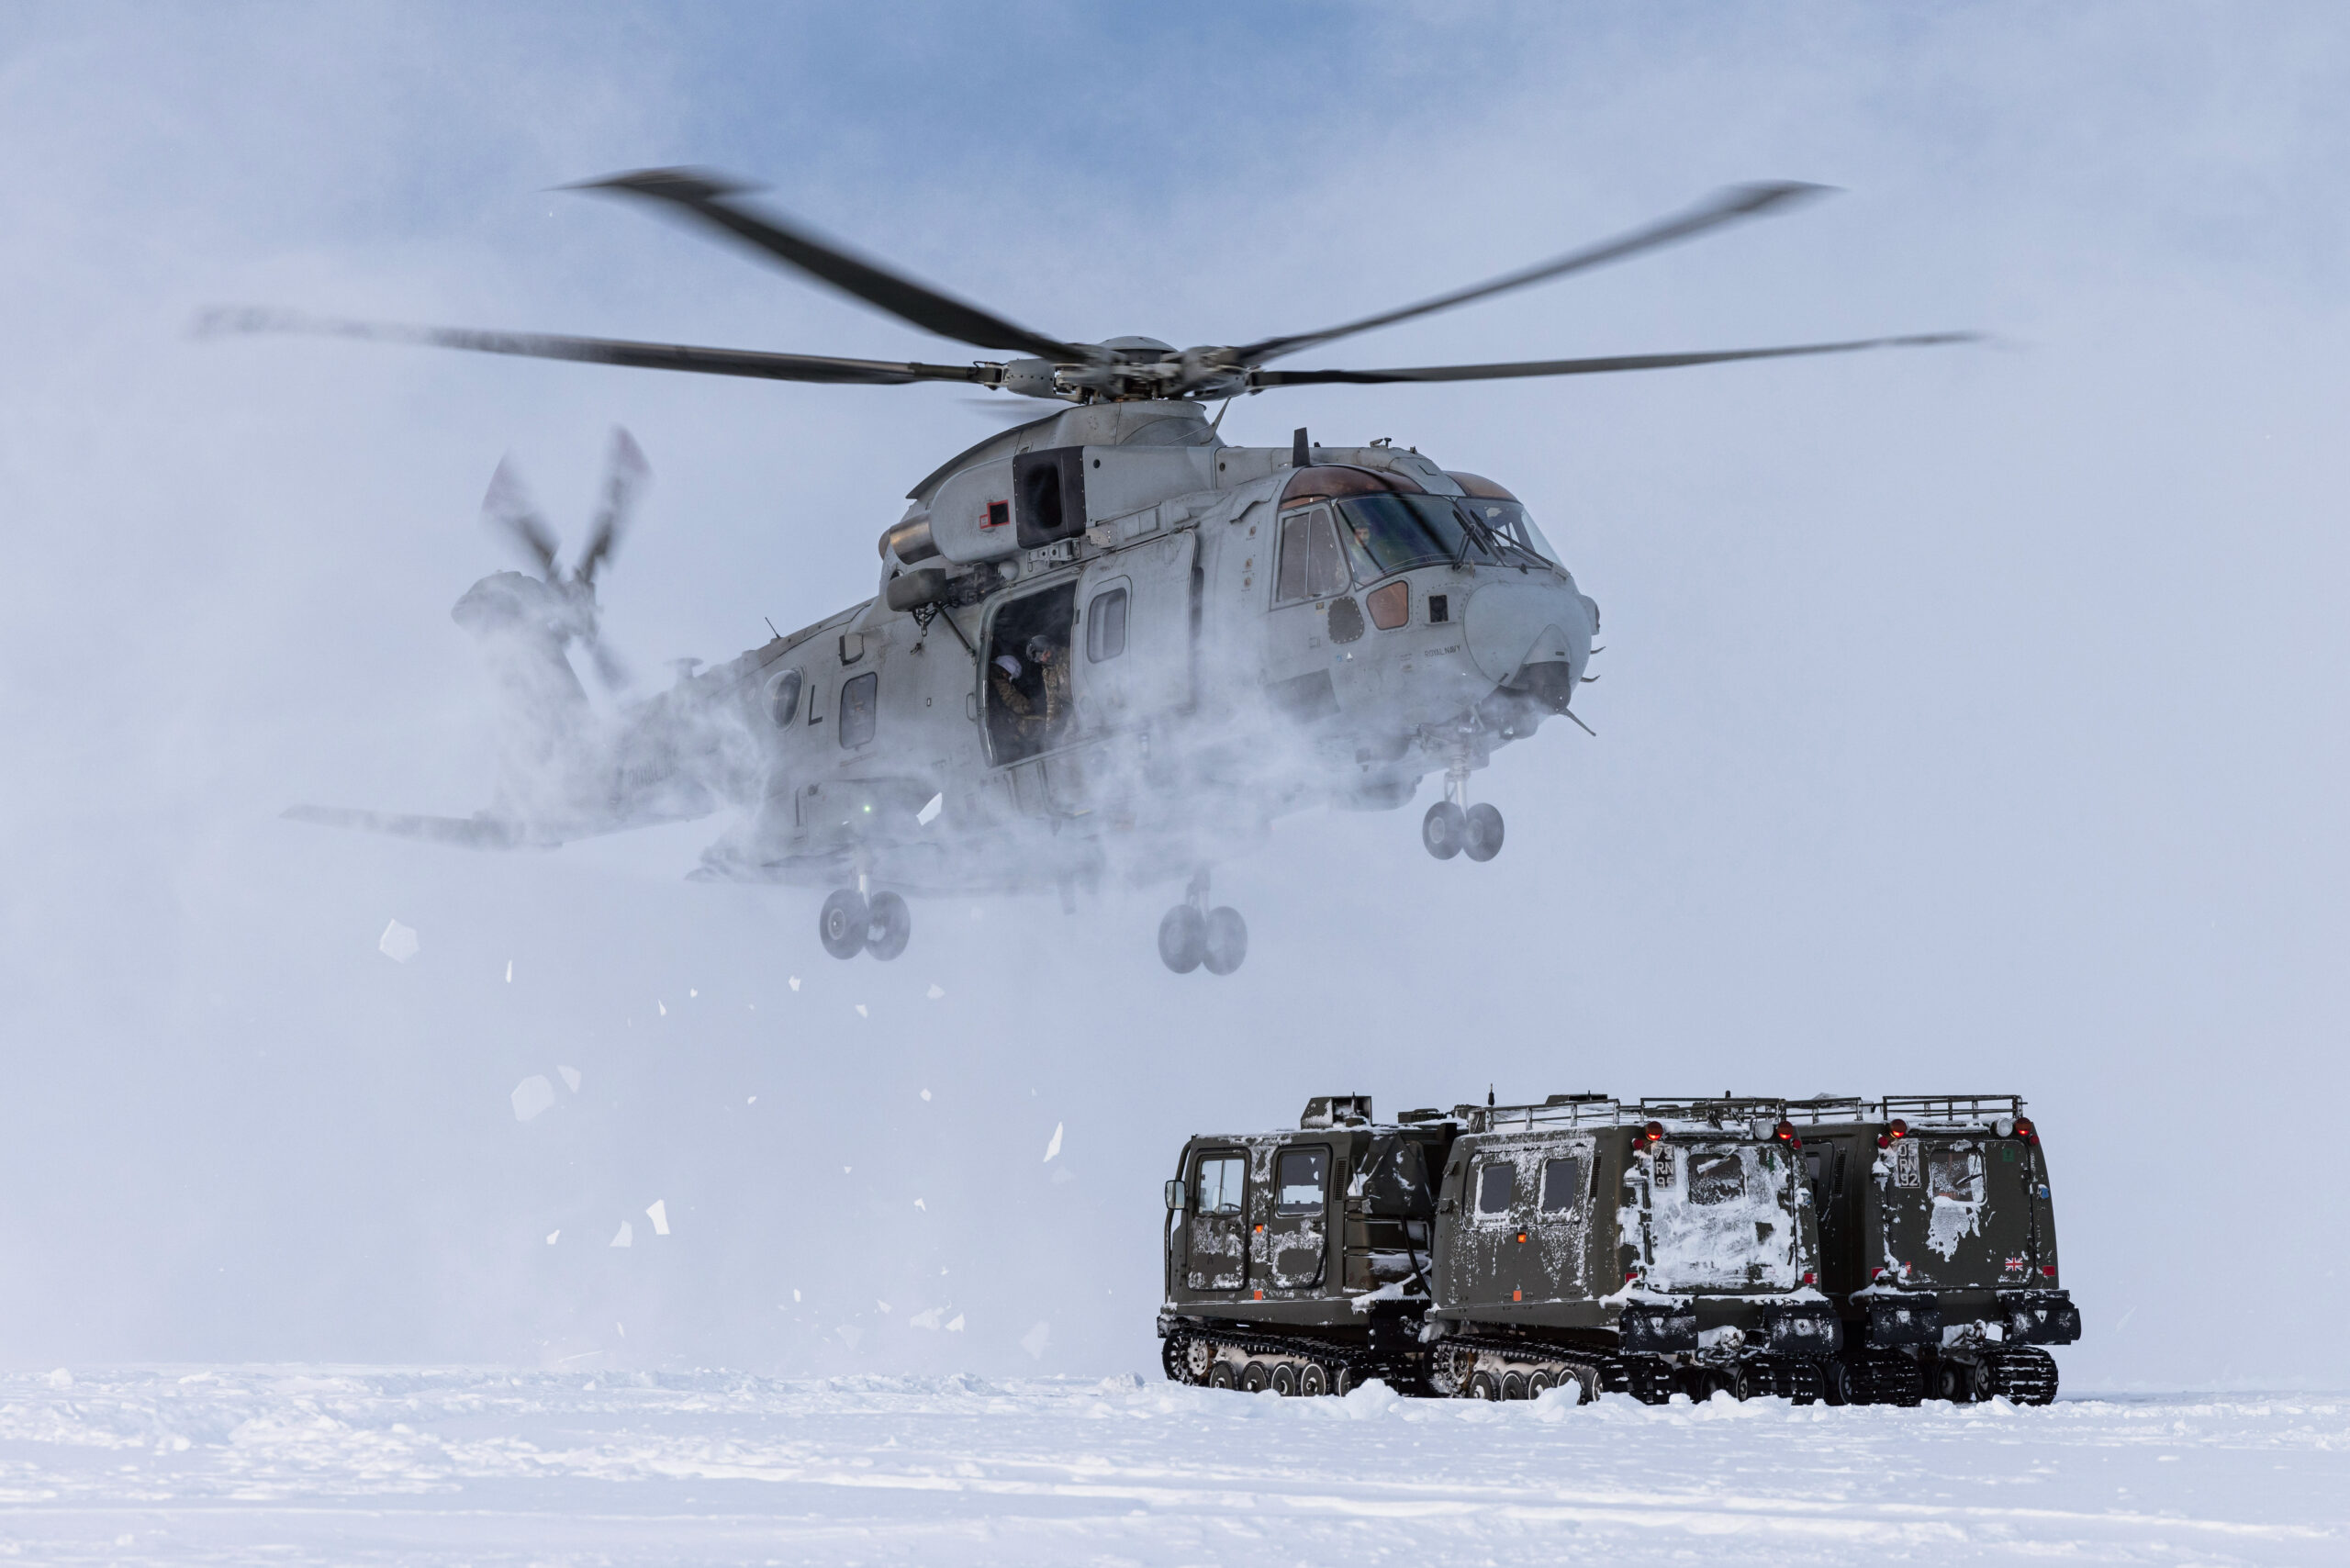 Pictured: A Merlin Mk4 of 845 NAS performs a snow landing using MAOTS BV Vehicles as reference. 845 NAS and CDO MOAT TRAIN WITH RN MEDICS IN ARCTIC ENVIRONMENT. 845 Naval Air Squadron (NAS) and the Commando Mobile Air Operation Team (Cdo MAOT) have conducted training with the Medical Squadron of Commando Logistic Regiment. The objective of the training was to teach the attached Royal Marines, Royal Navy Medical Assistants, Naval Nurses, and Medical Officers of the Forward Surgical Teams (FSTs) and as a group, known as the Commando Forward Surgical Group (CFSG) in Stage 1 Evacuation drills from the Merlin Mk4 and Arctic Casualty Loading Drills in the field. As the CFSG team were dropped off by 845 NAS, Cdo MAOT assisted by the MAOT team of the Joint Helicopter Support Squadron (JHSS) took over the training by first getting them into a ‘Arctic Huddle’ to protect themselves from the freezing downwash of the merlin as they took back off. The CFSG were then shown how to assess suitable Helicopter Landing Sites in deep snow and frozen areas. Op CLOCKWORK (Formally Exercise CLOCKWORK) has been running at Bardufoss for over 50 years and delivers Environmental Flying Qualifications, Cold Weather Survival, Tent Group Commanders and Snow and Ice driving courses to ensure that the personnel of the Joint Helicopter Command (JHC) are trained to operate in the harshest of environments.